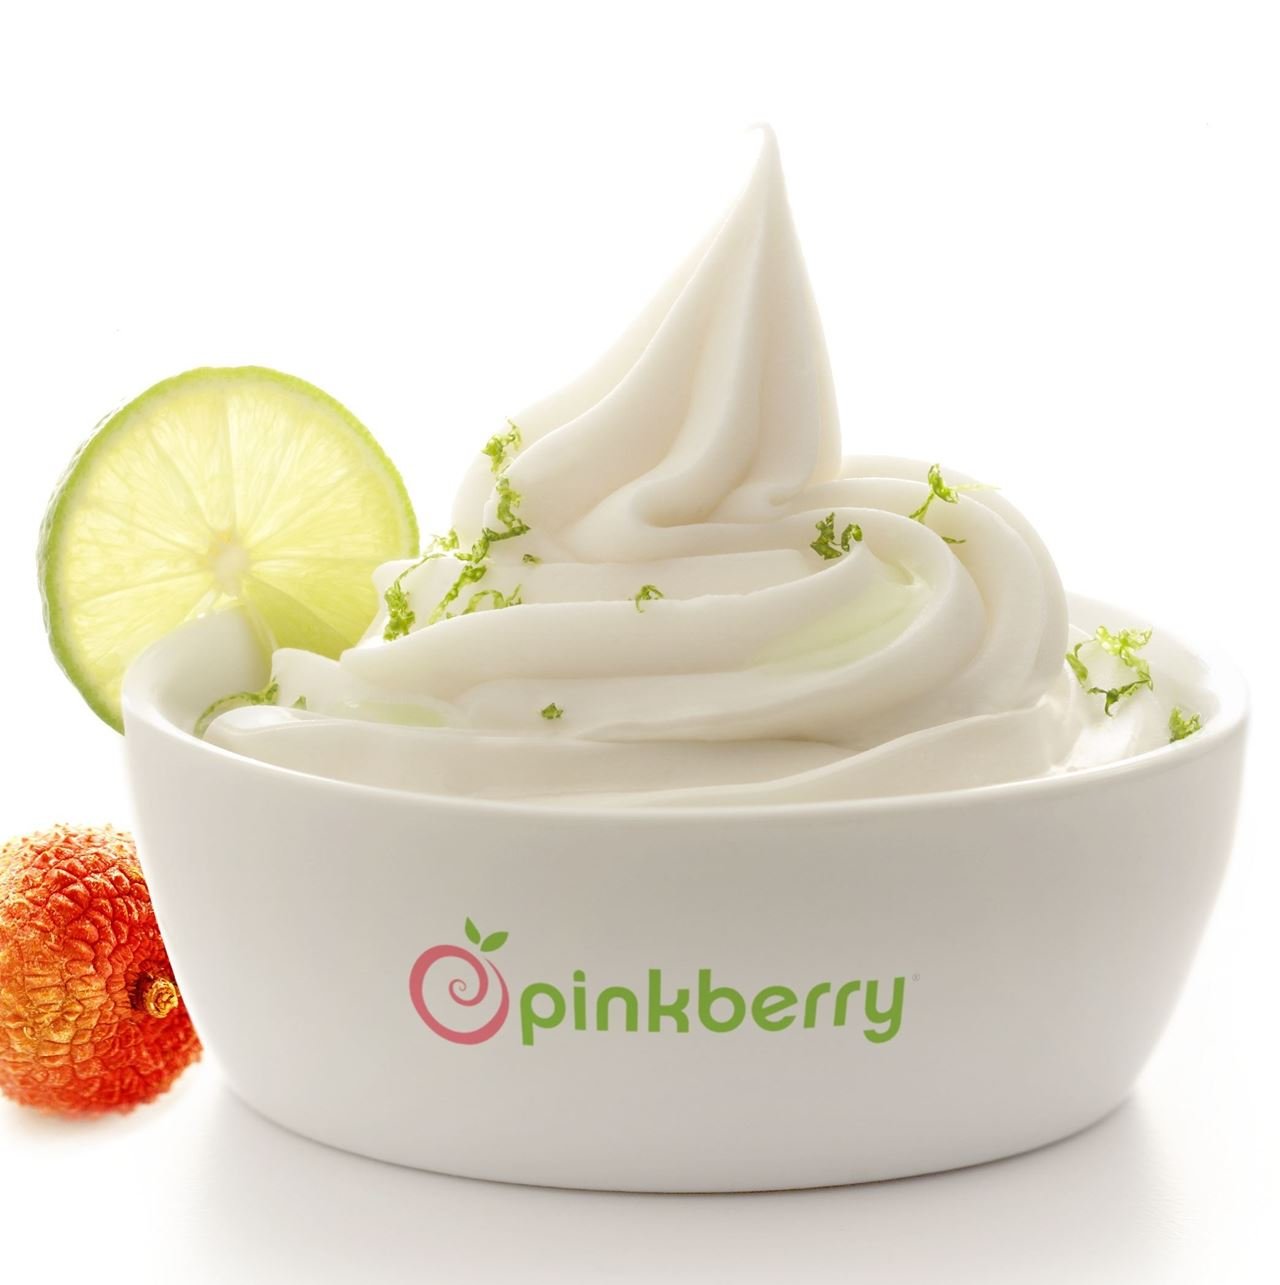 Keep calm and fall in love with Pinkberry amazing yogurt flavors!